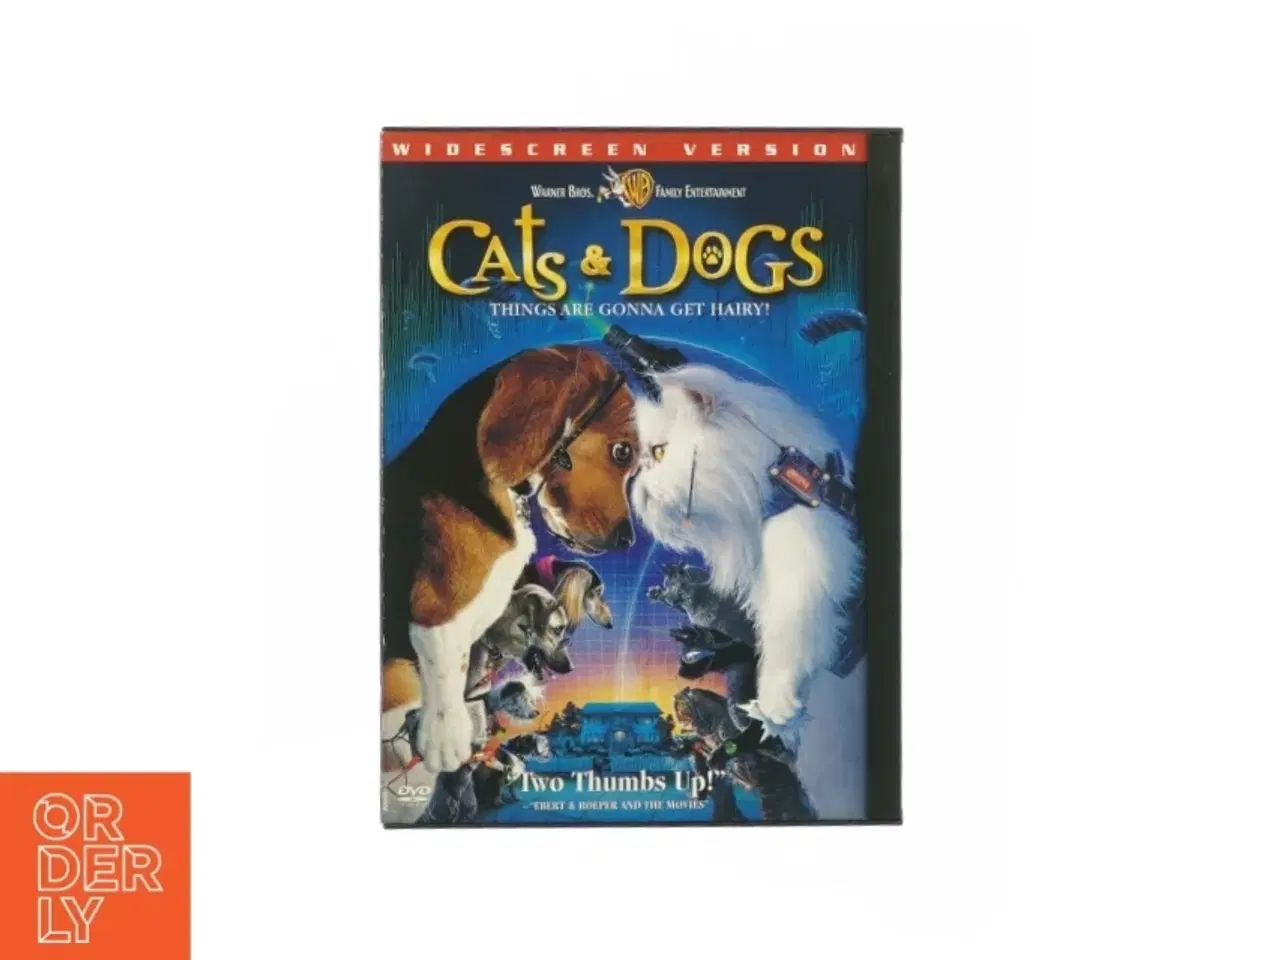 Billede 1 - Cats and dogs (DVD)